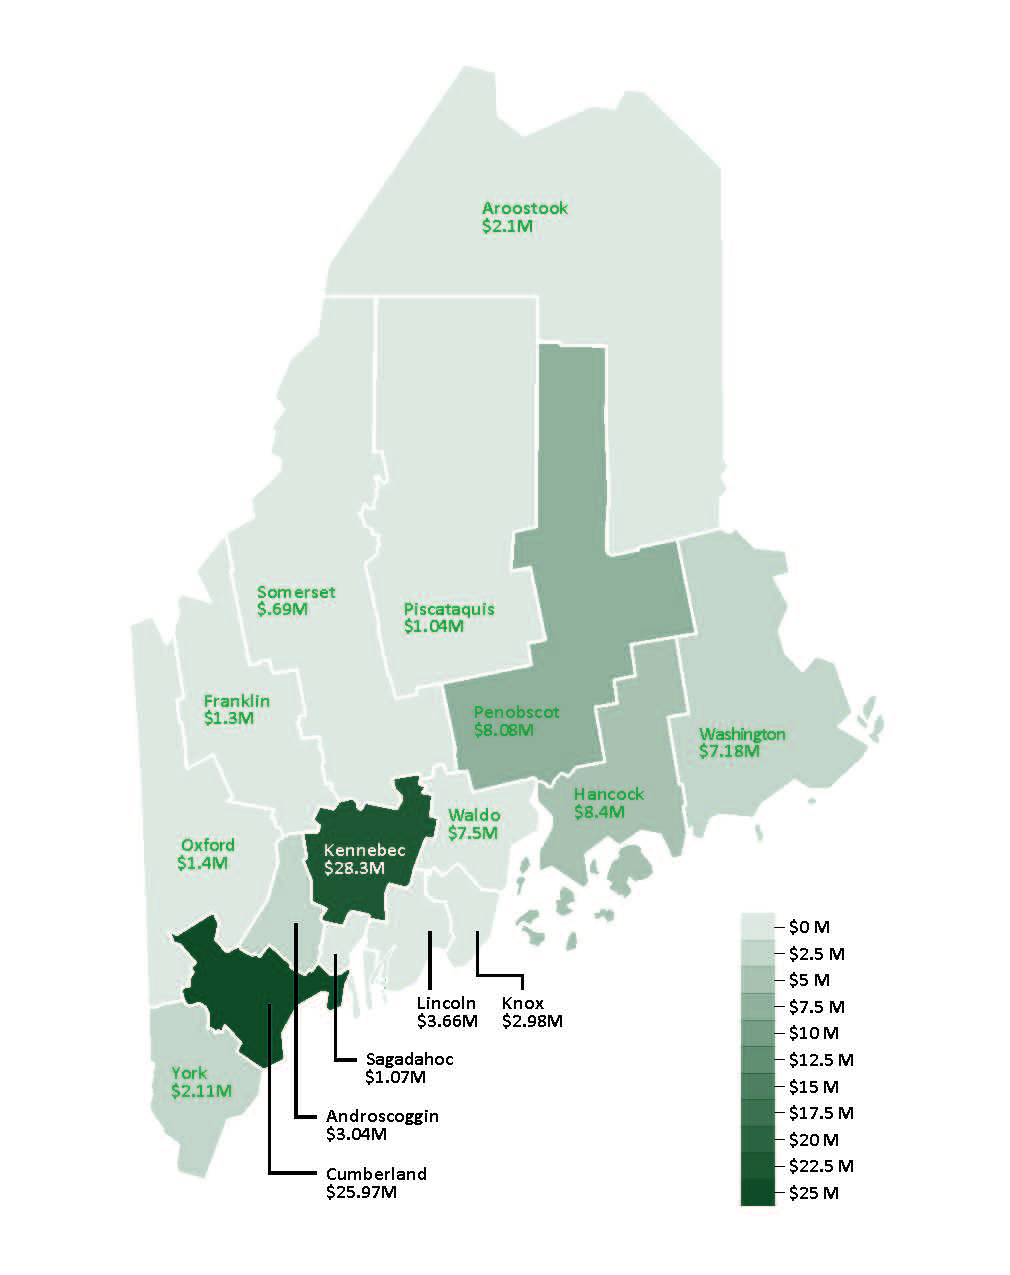 2016 Grants in Maine, by County